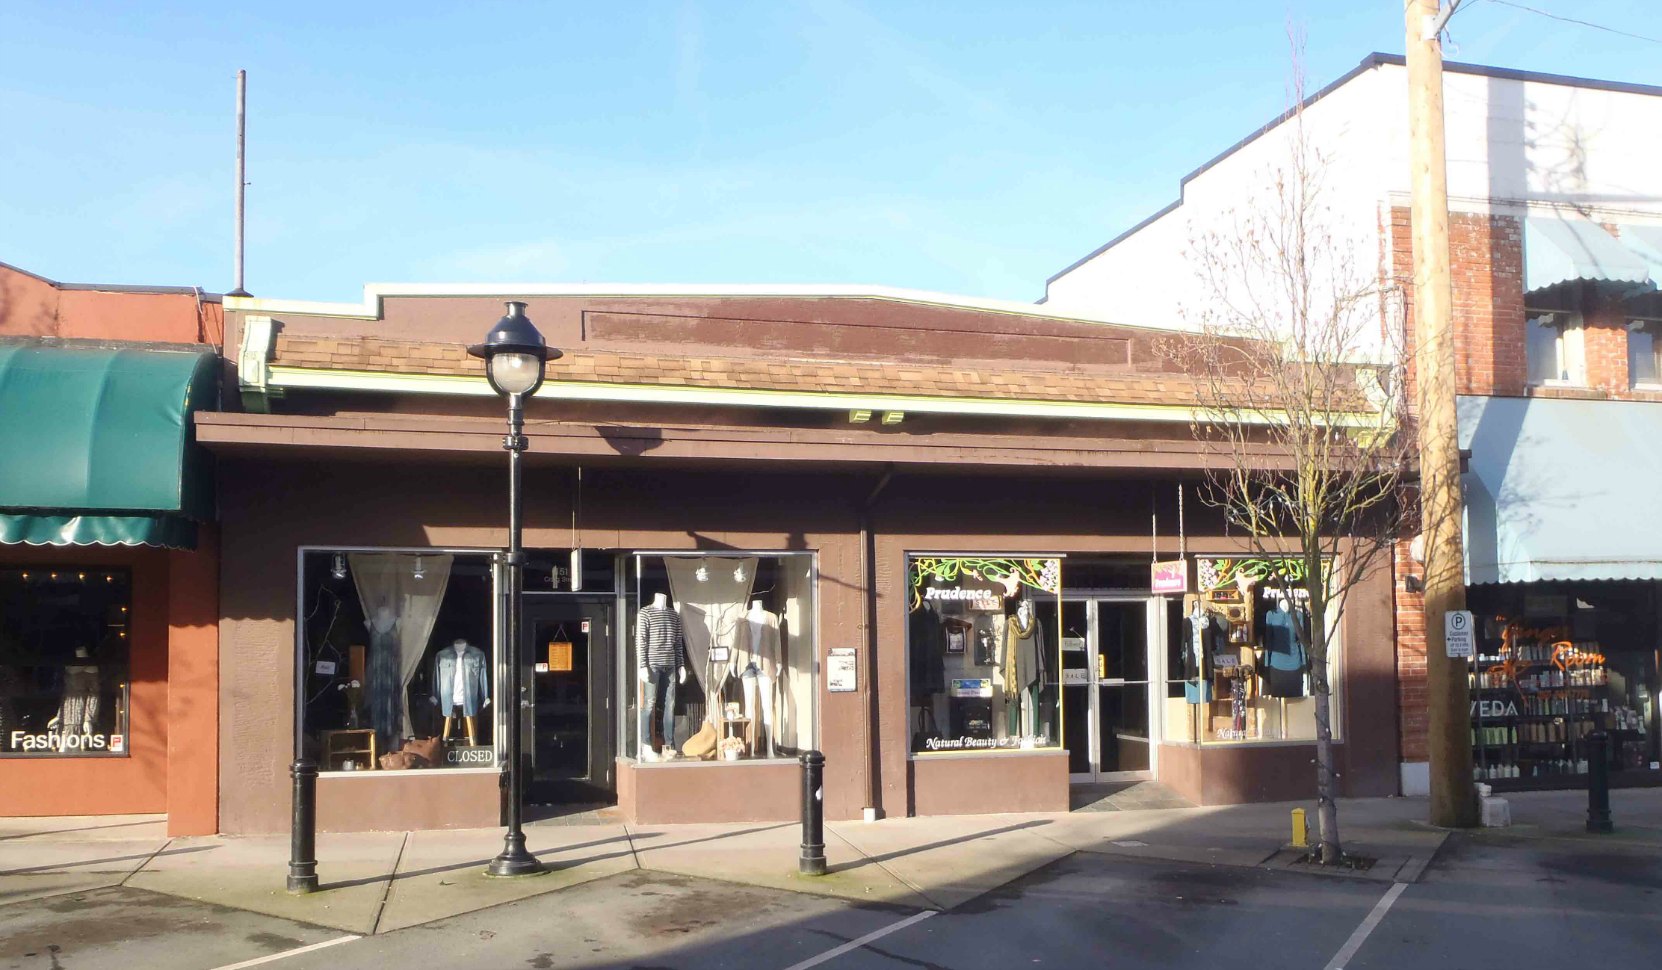 151-155 Craig Street is now two retail stores but it was built in 1929 by architect Douglas james for Hugh George Savage's Cowichan Leader newspaper.